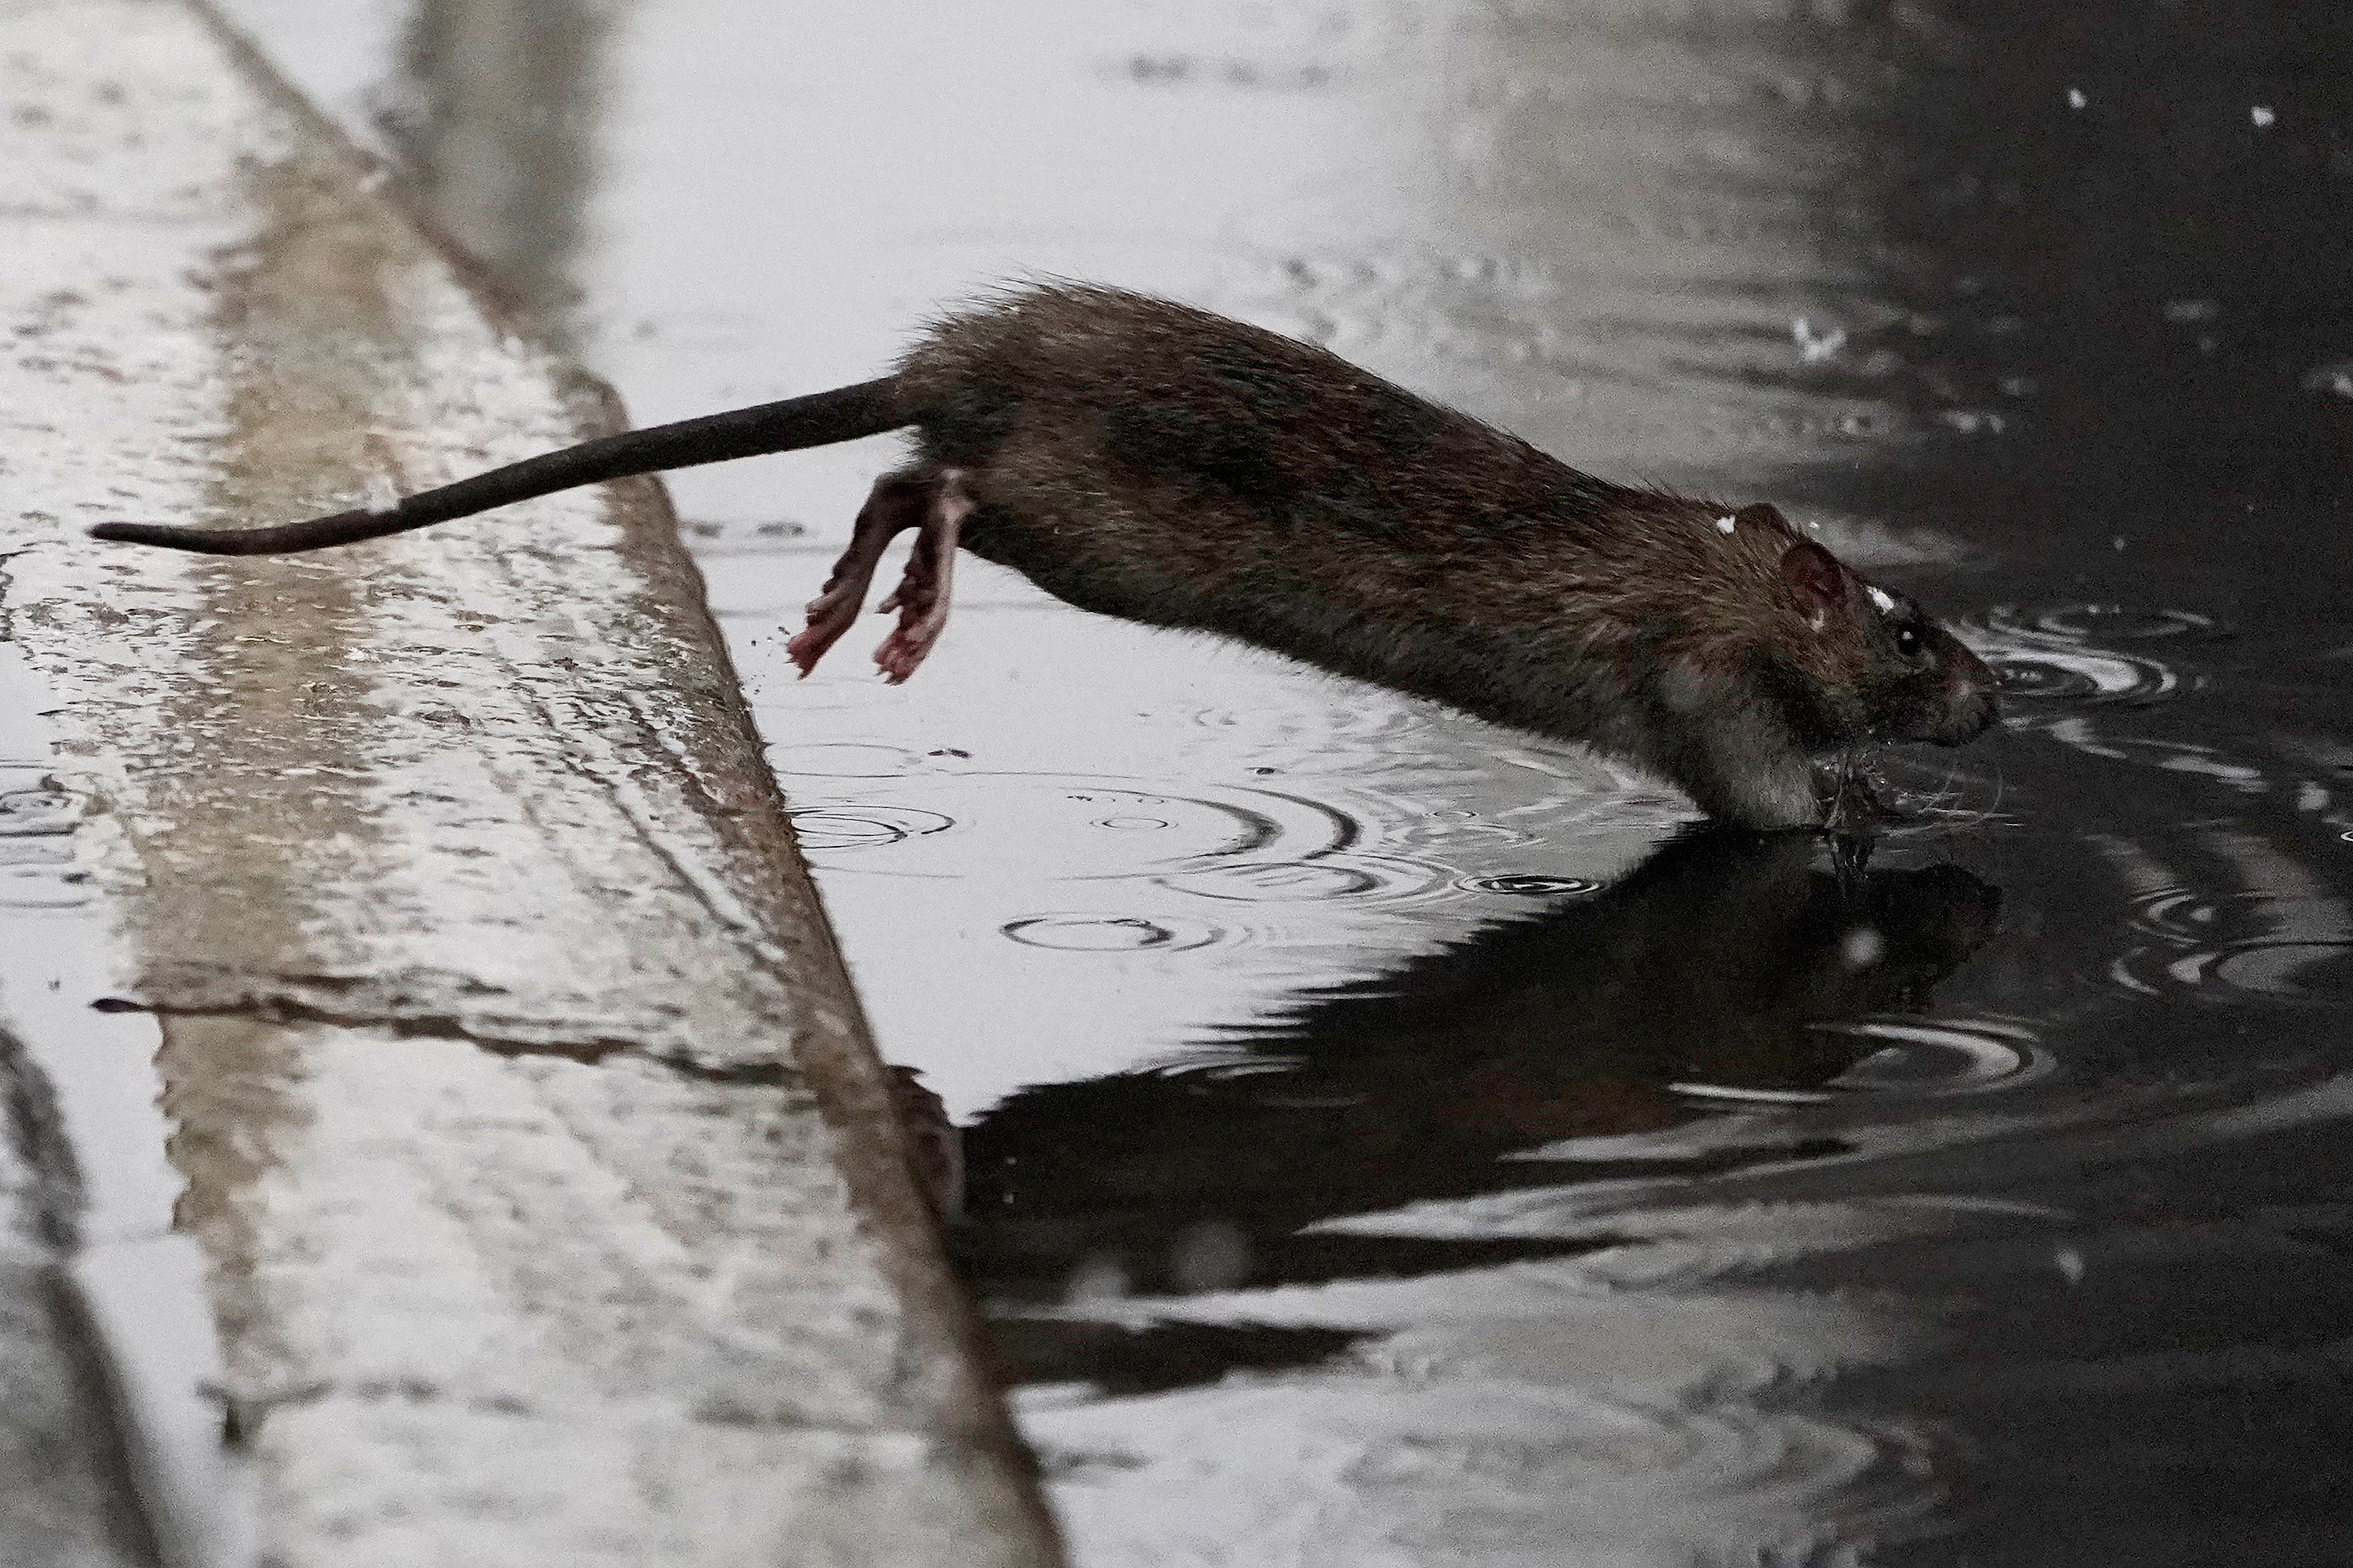 A rat jumps into a puddle in the snow in the Manhattan borough of New York City